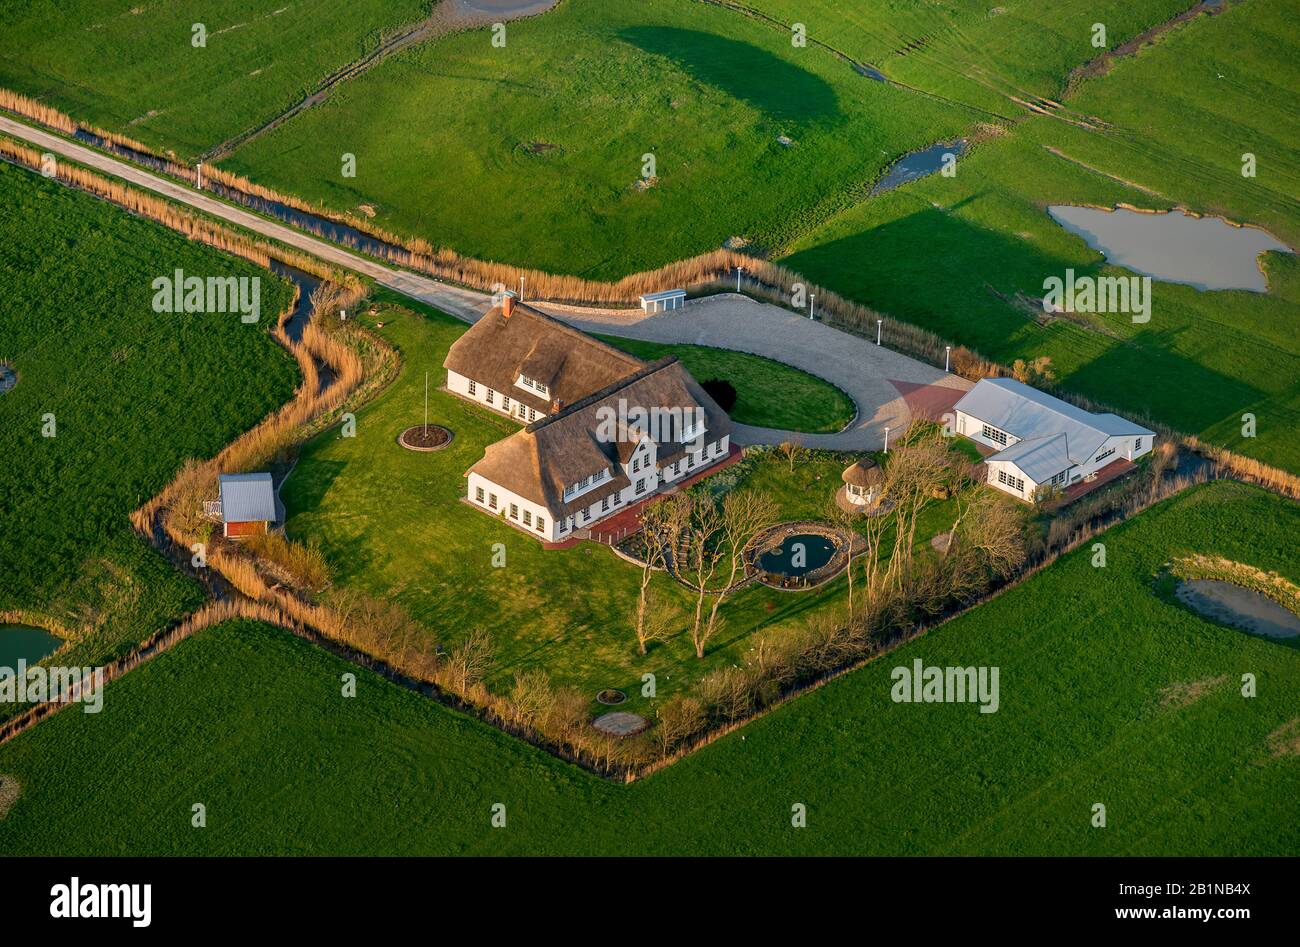 Frisian house with thatched roof on island Pellworm, aerial picture, Germany, Schleswig-Holstein, Northern Frisia Stock Photo